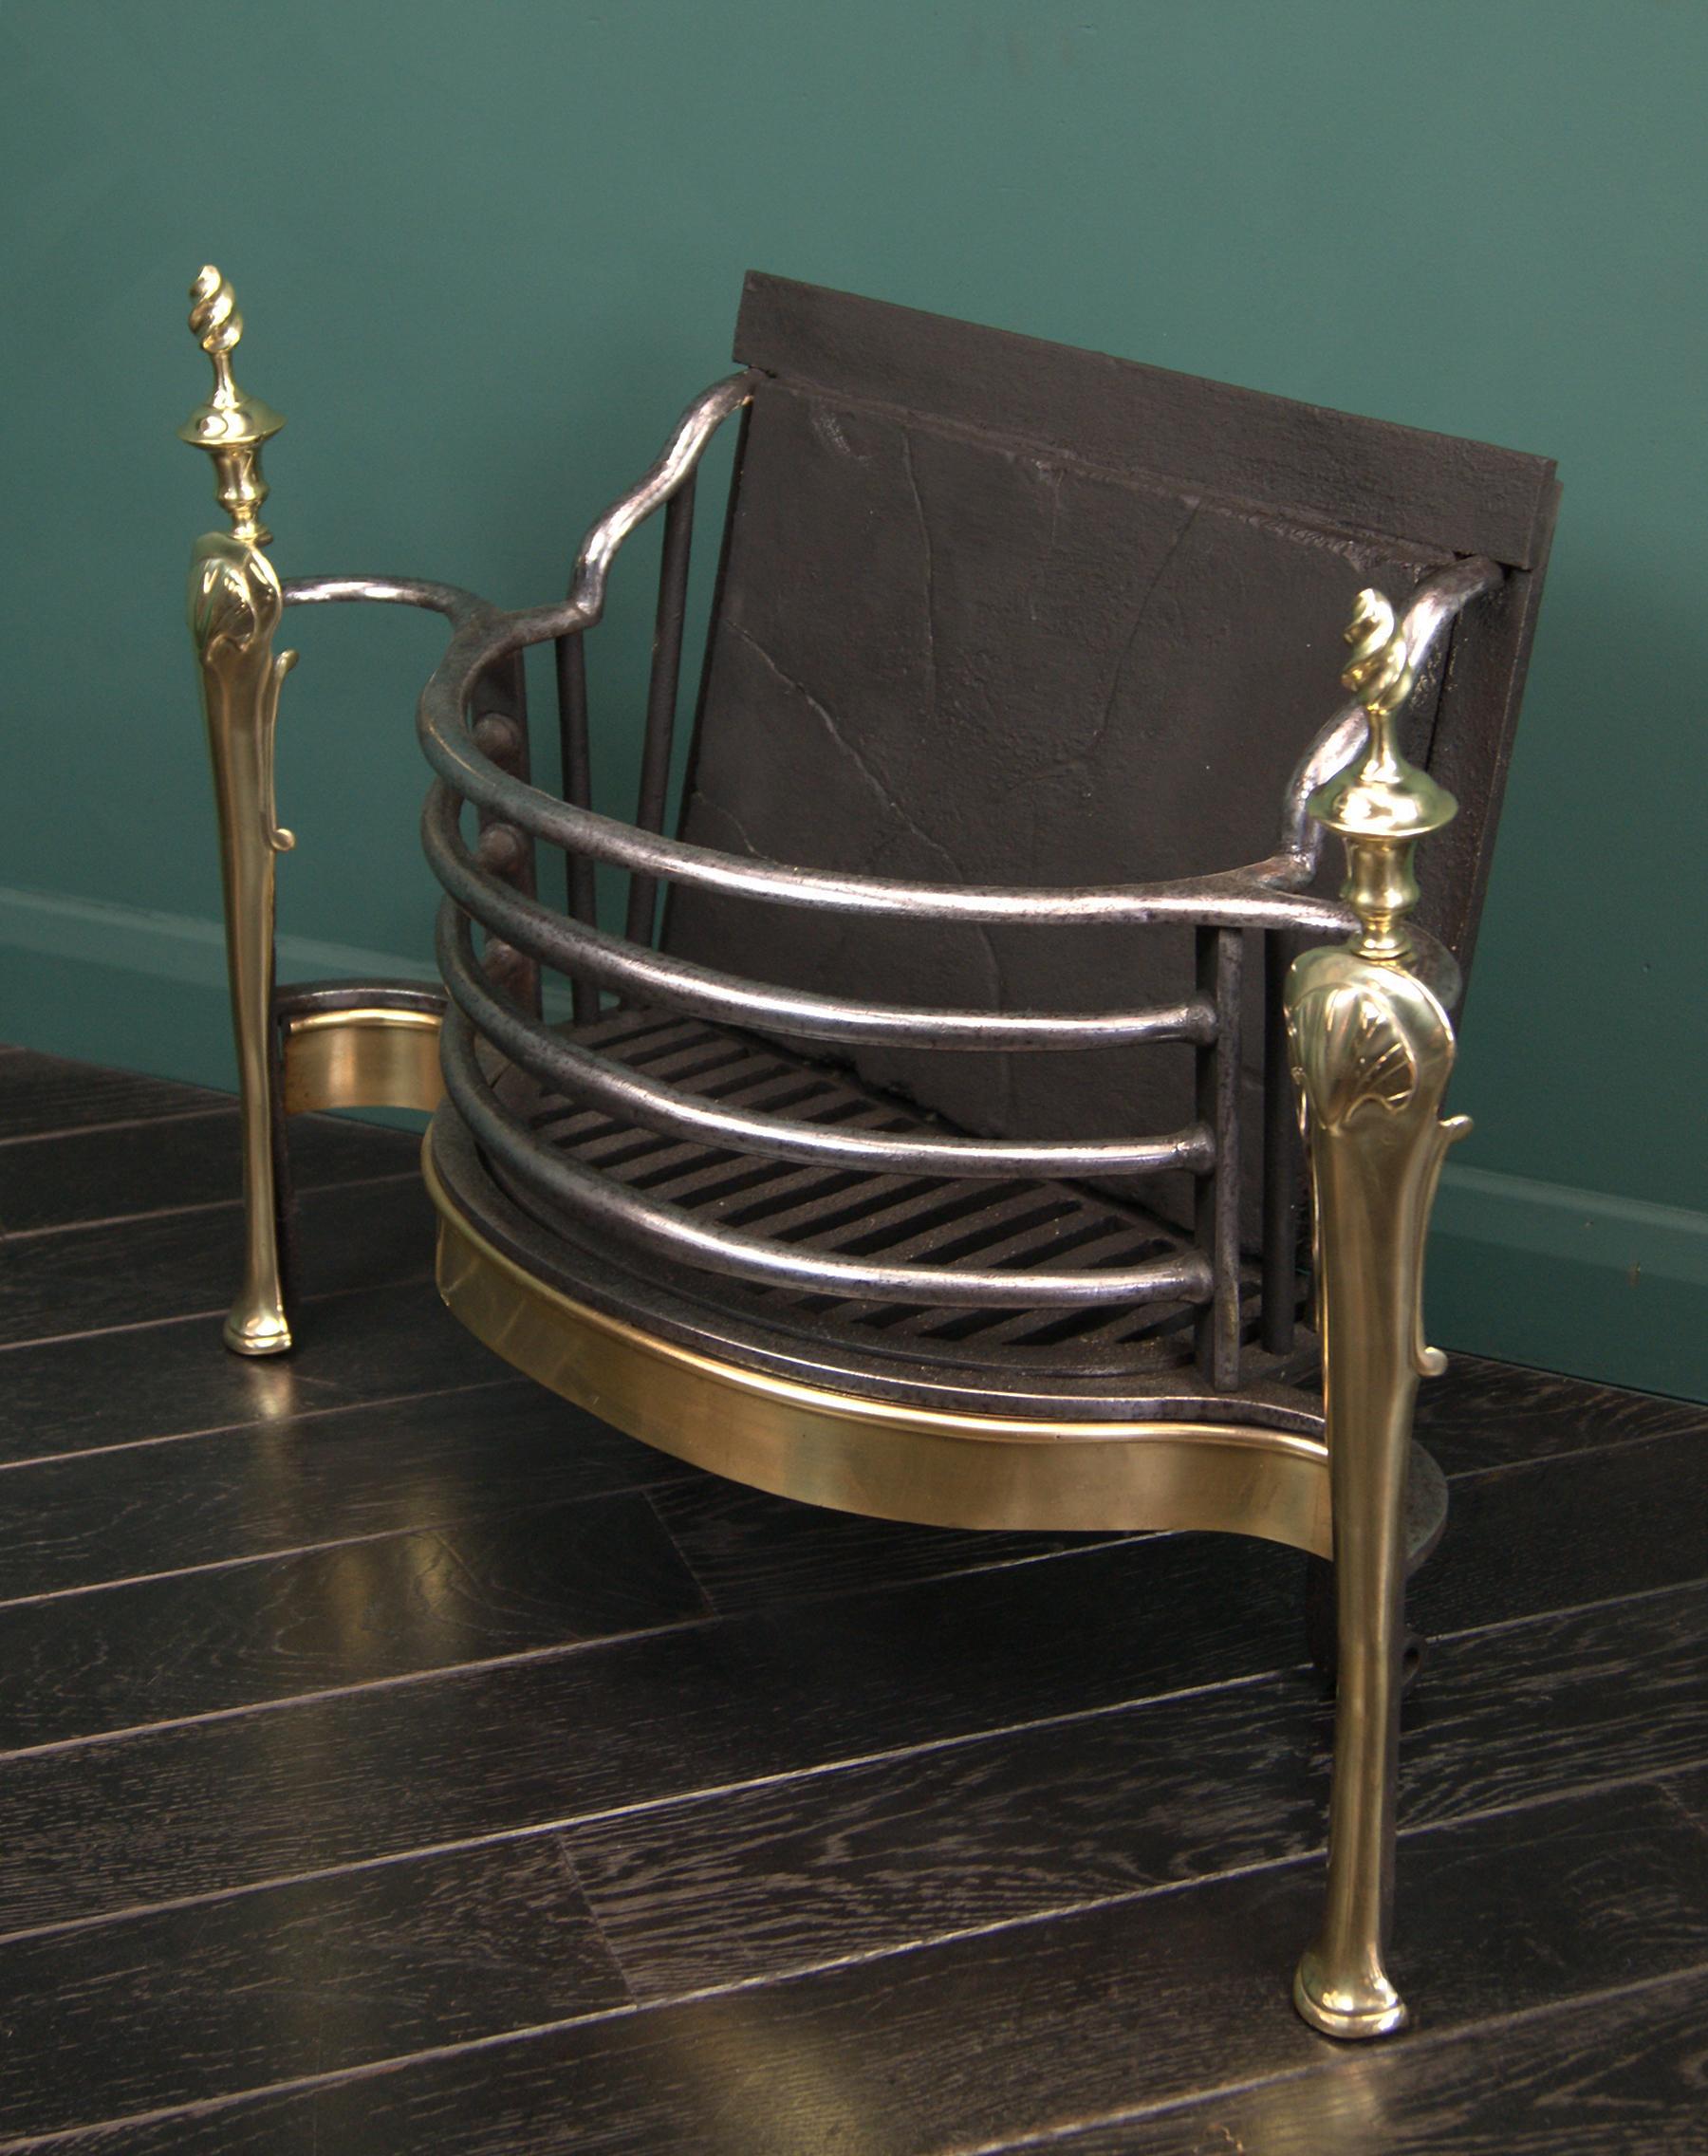 A fine 19th century English brass and wrought fire grate in the Queen Anne style. The delicately curved fire bars are set above a brass apron flanked by brass standard with flame finials uppermost. Restored. 
Circa 1890